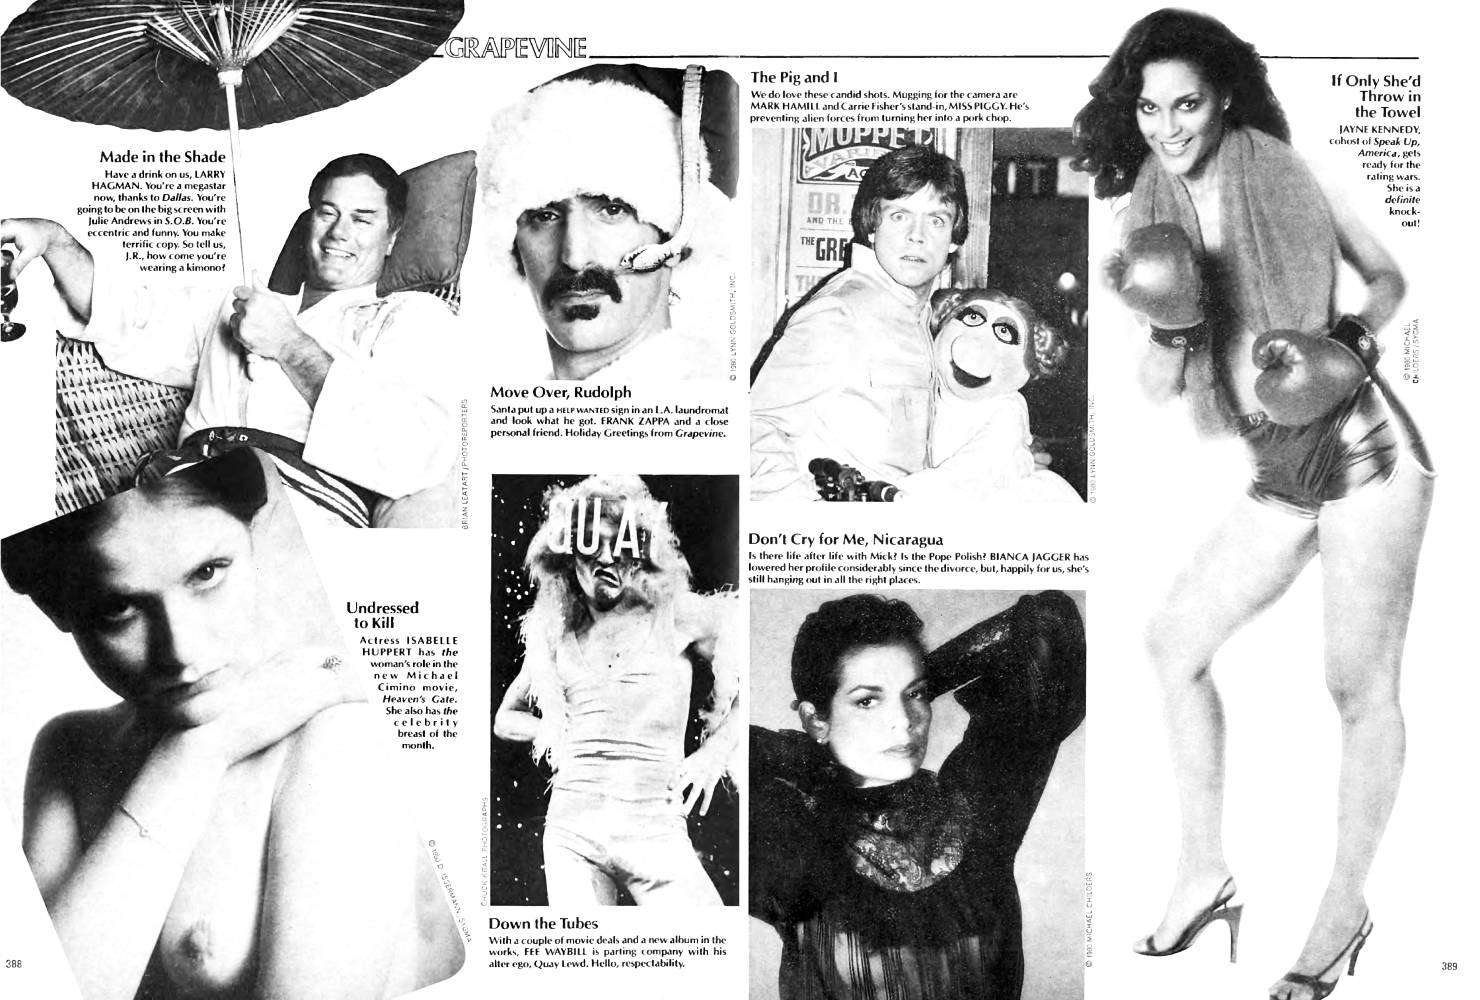 Jayne Kennedy – Pipe and PJs: Pictorials